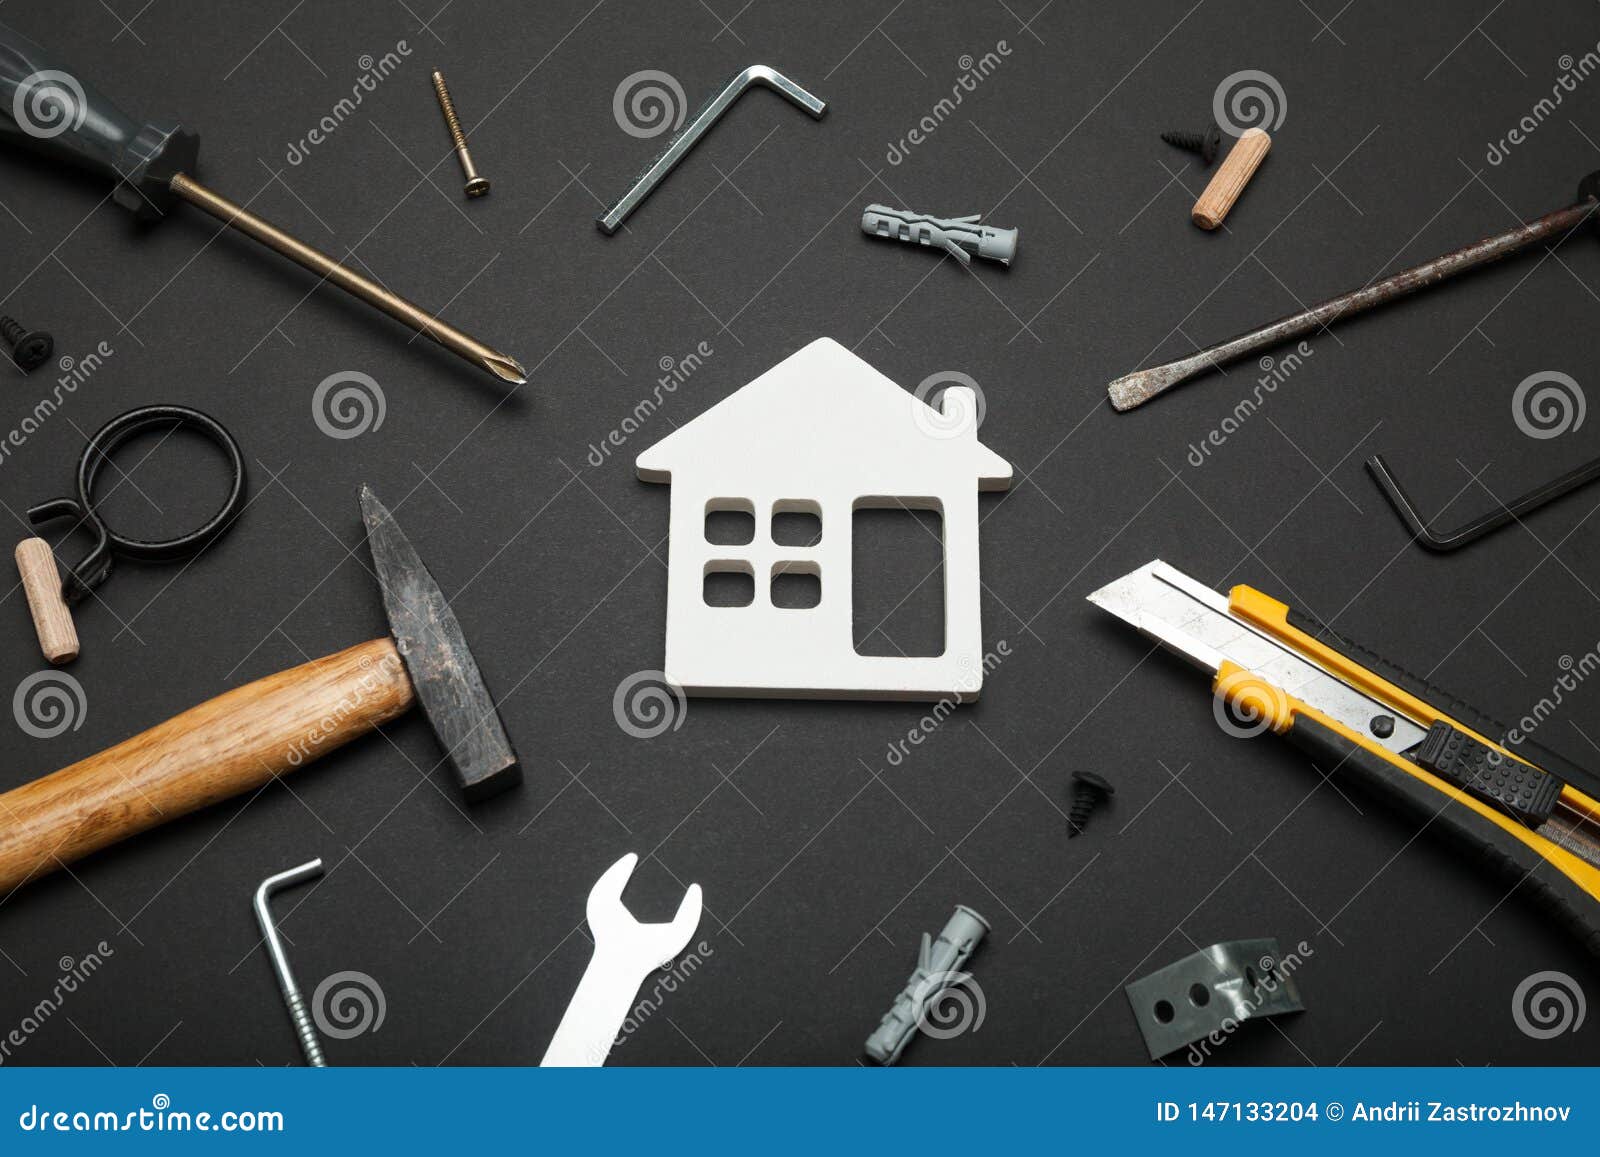 197,744 Home Repair Photos - Free & Royalty-Free Stock Photos from